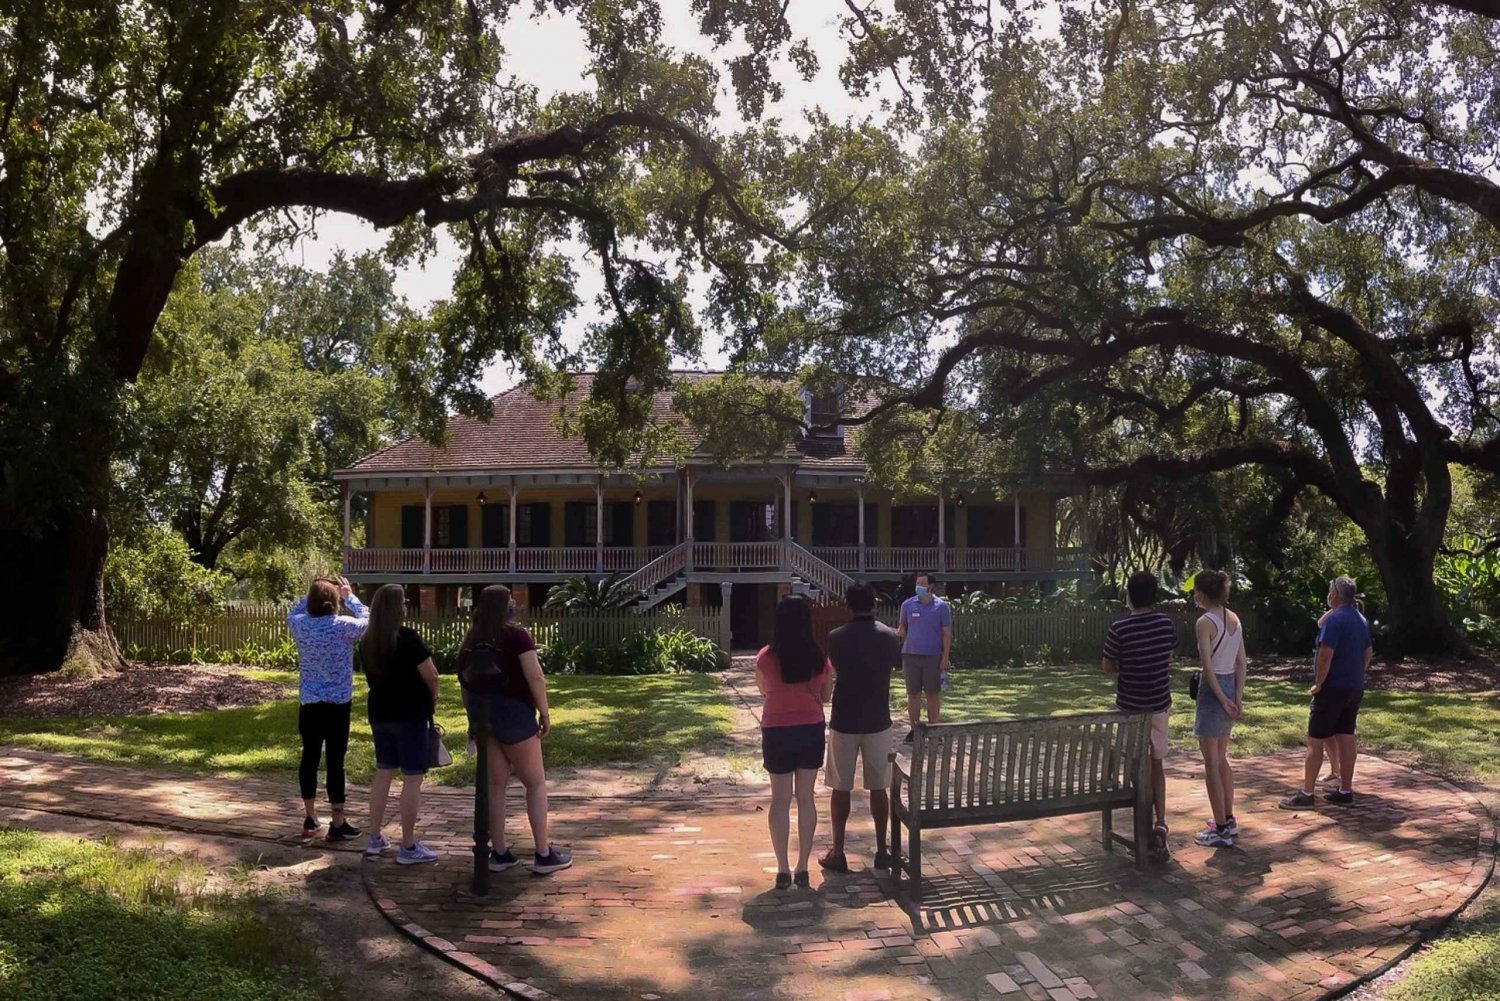 From New Orleans: St. Joseph and Laura Plantations Tour